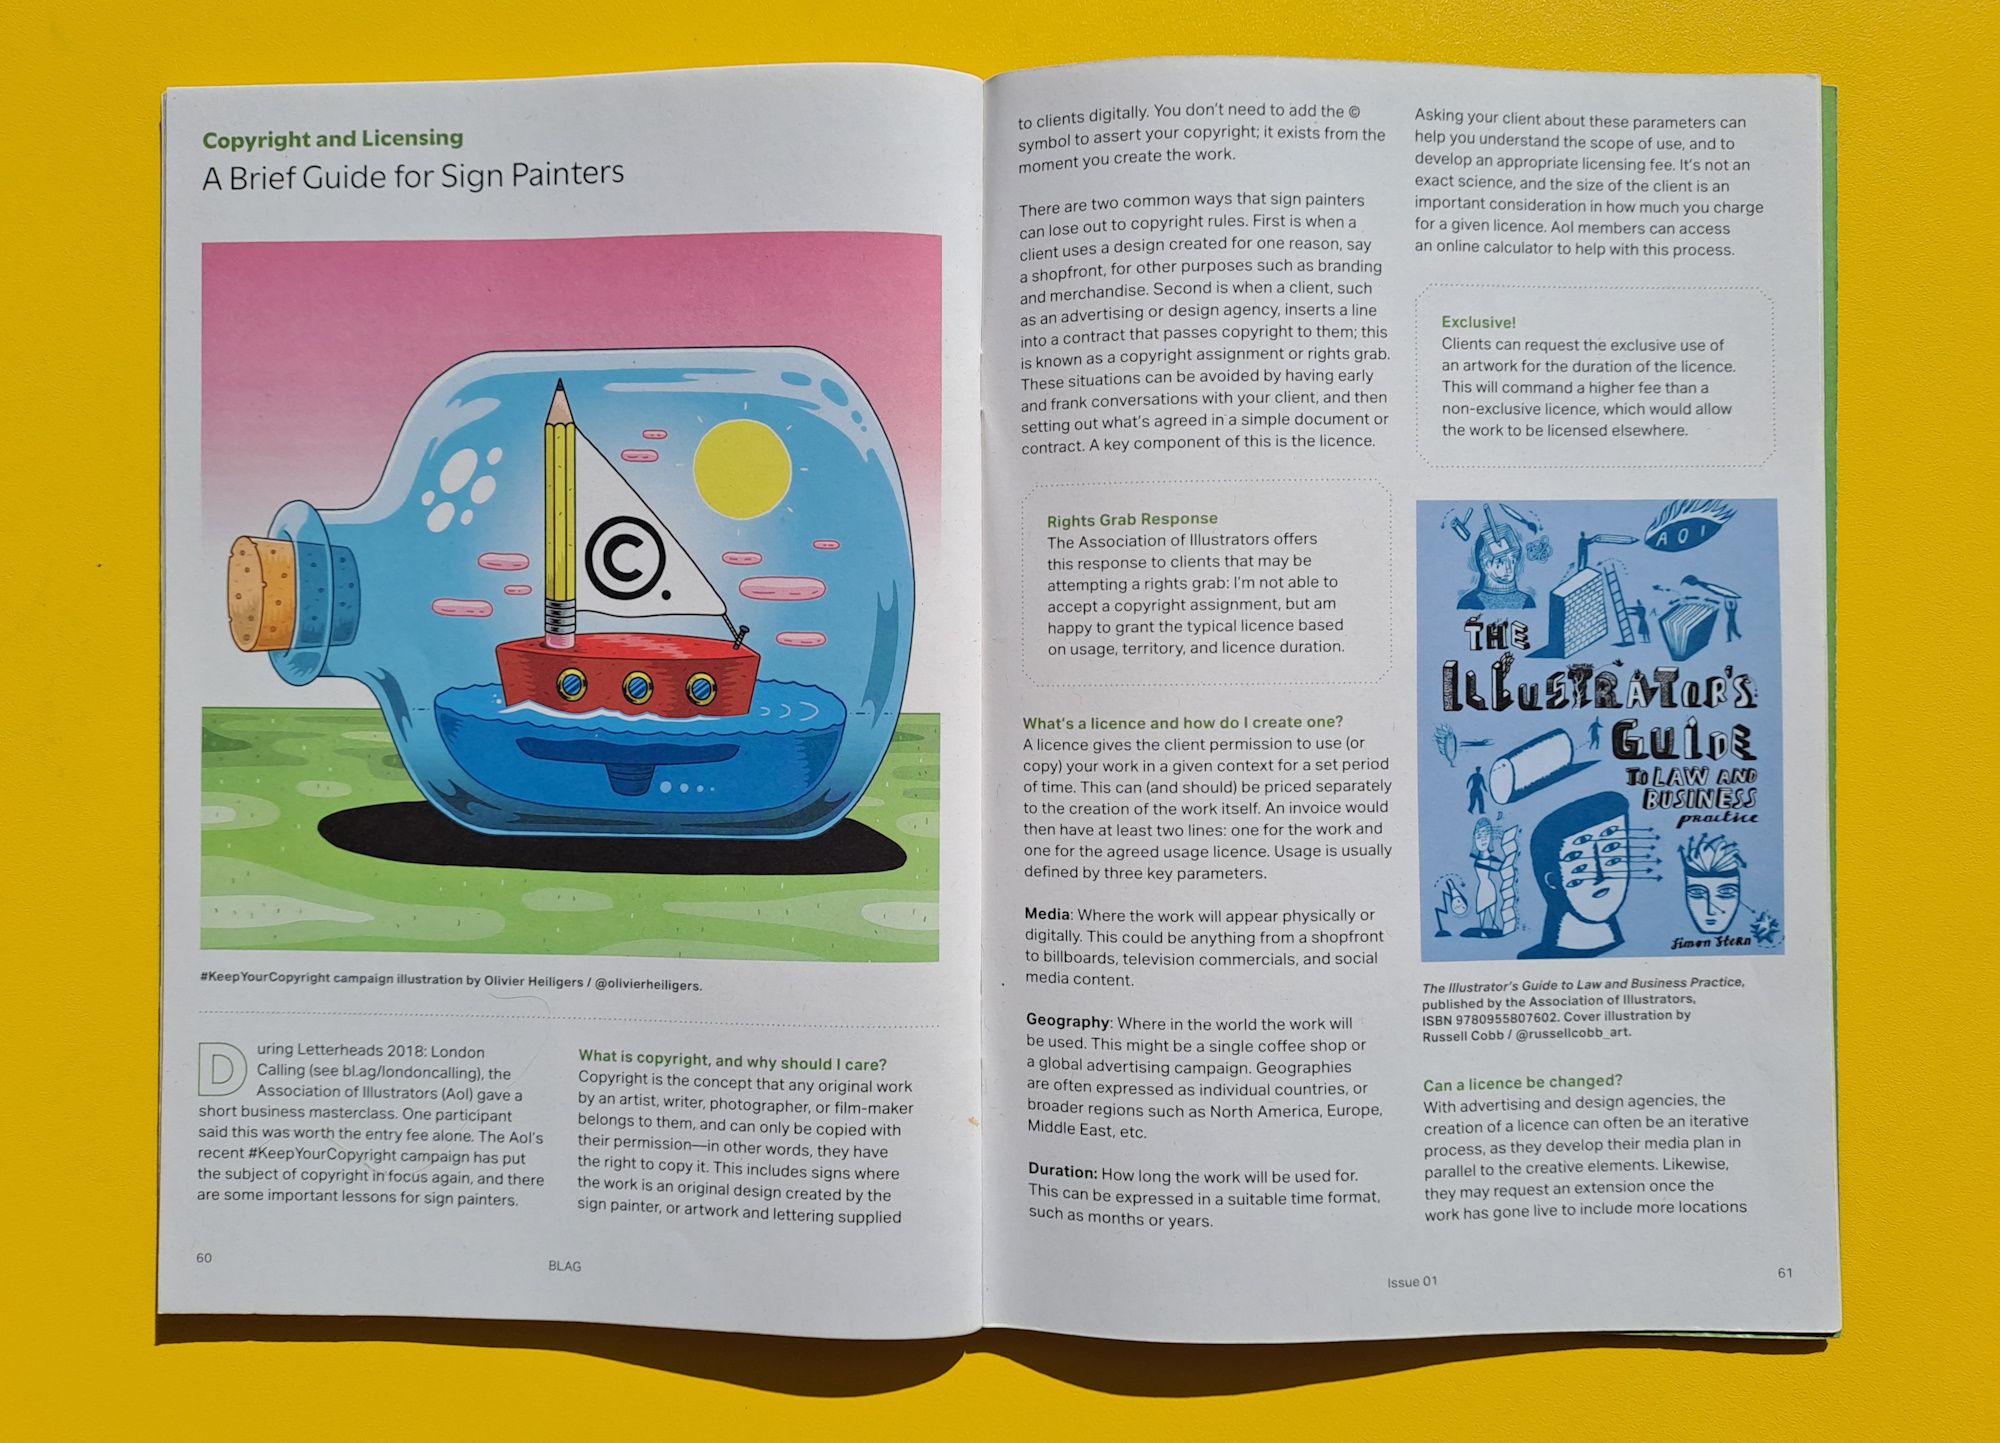 Magazine spread with mixture of text and illustration, photographed on a bright yellow surface. 